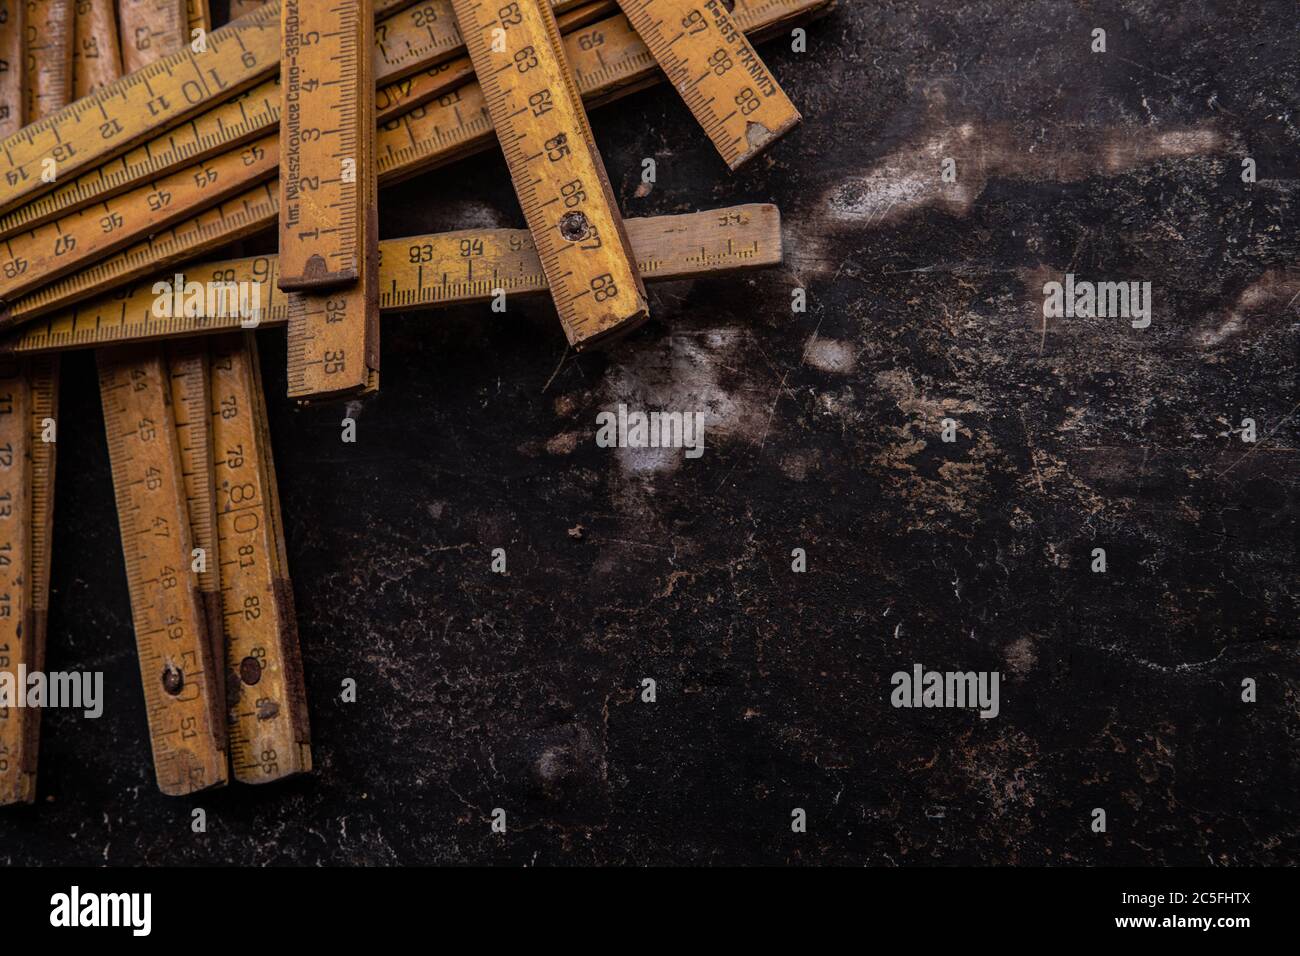 old tools, hammer, chisel, spatula measuring tape and brushes greasy and dirty heavily rusted lie on a metal dark background Stock Photo